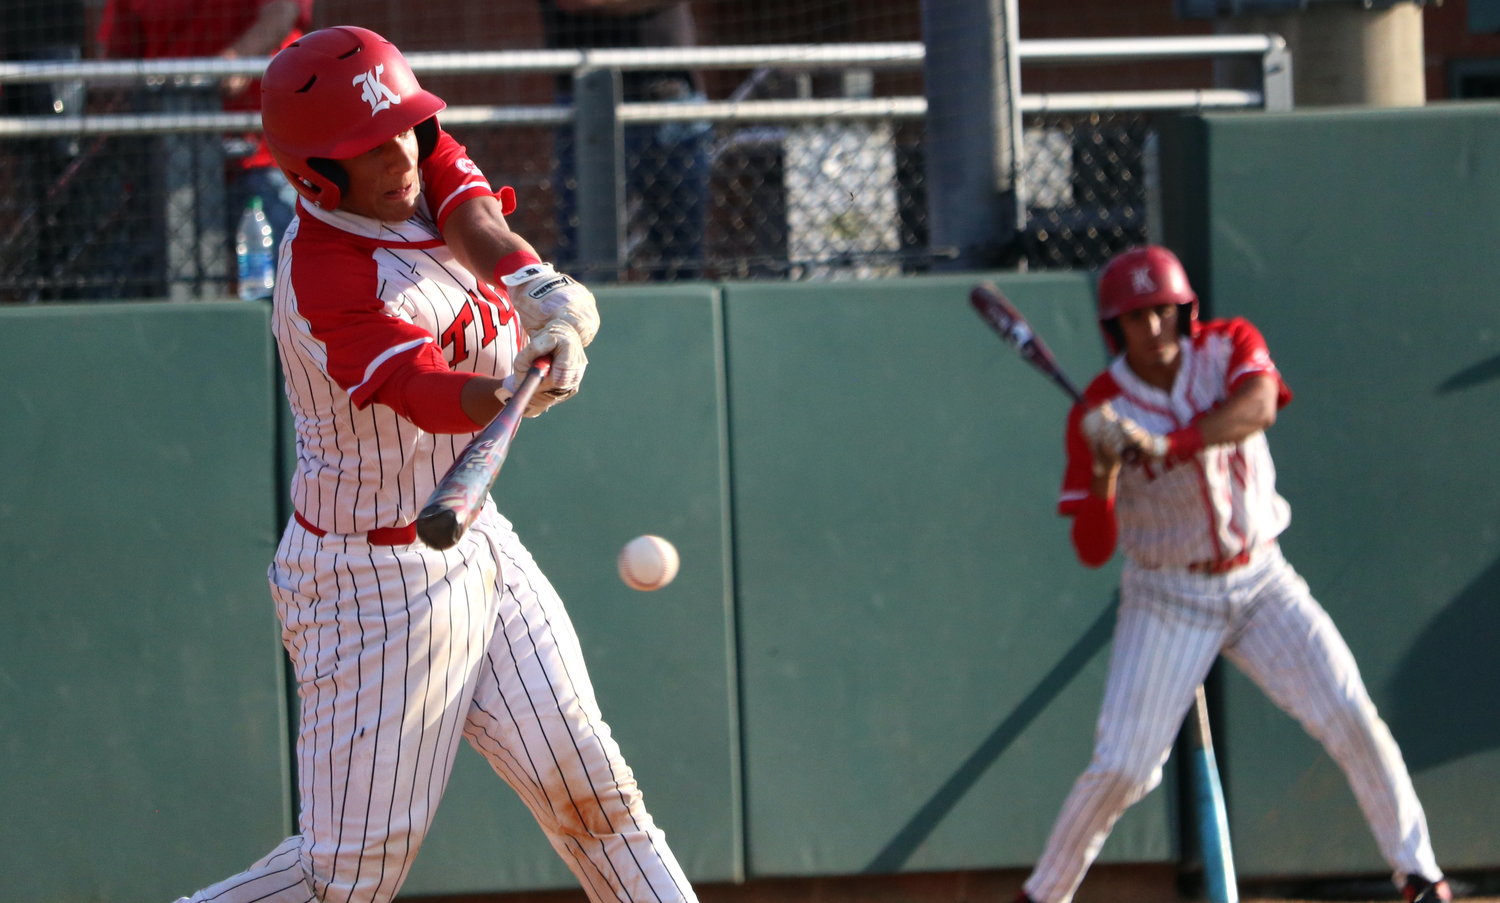 Reese Ruderman hits during Friday’s area round game between Katy and Jersey Village at the Katy baseball field.